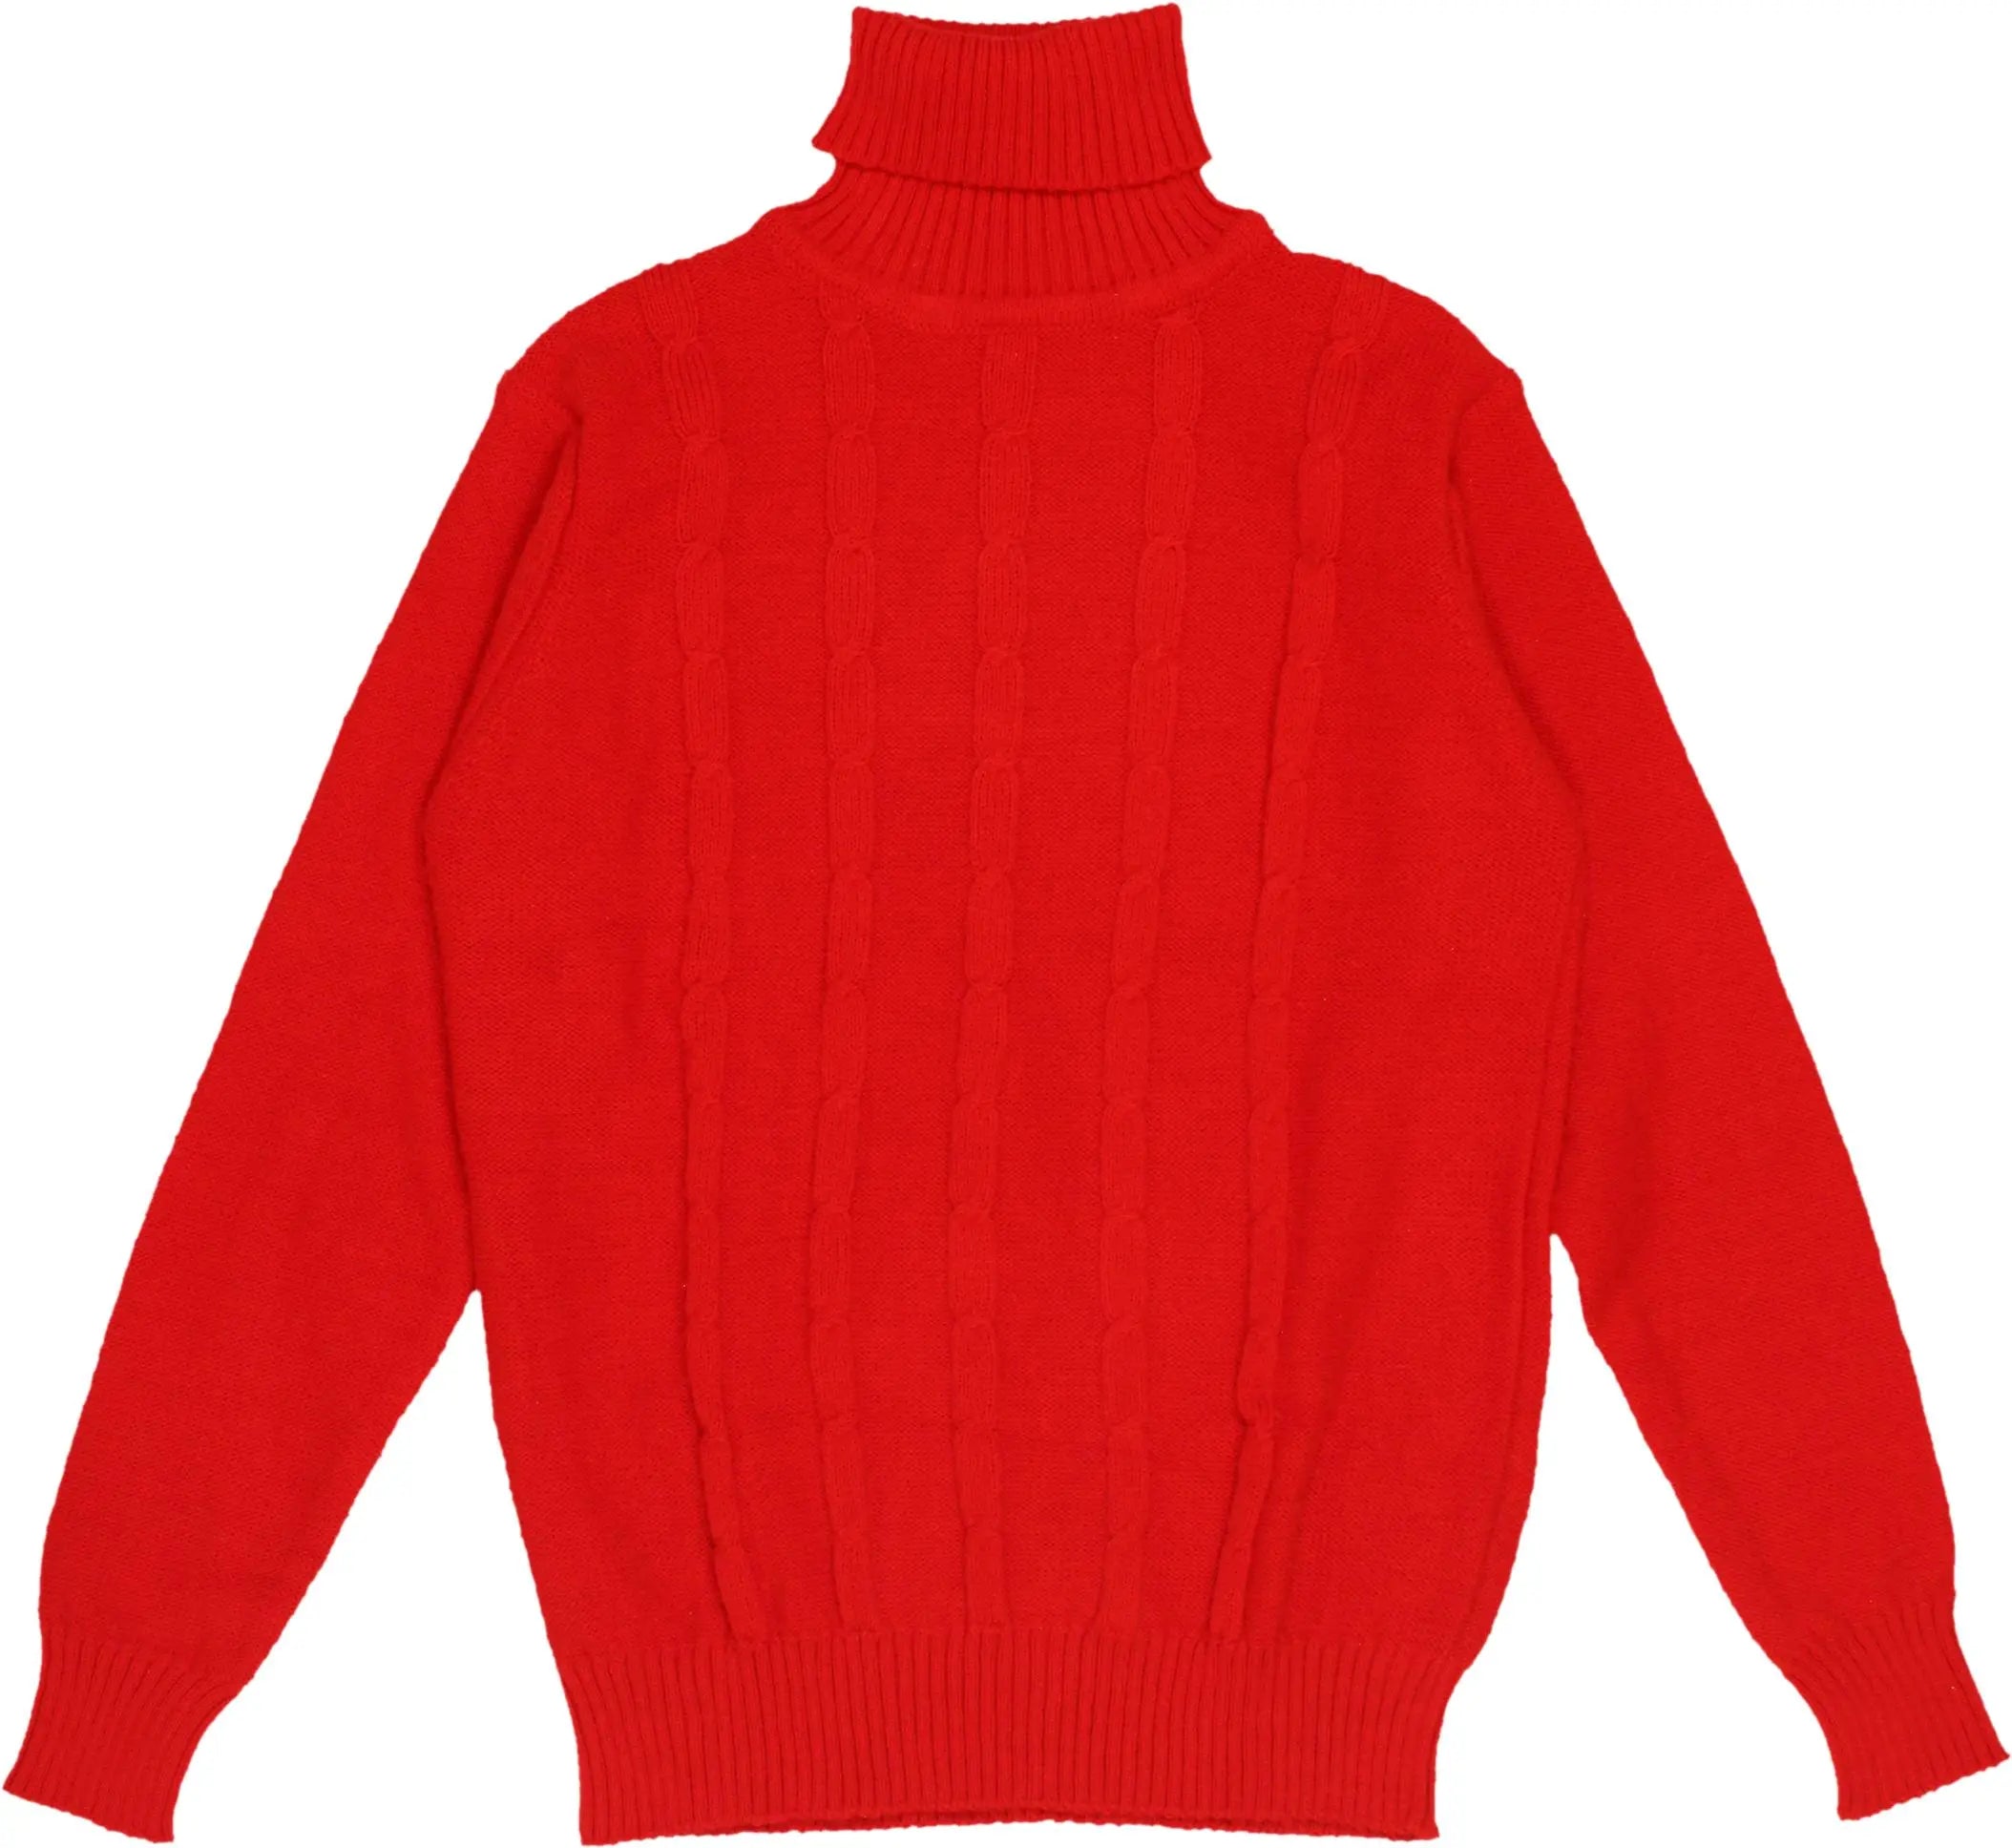 Unknown - Vintage Cable Knit Turtleneck Jumper- ThriftTale.com - Vintage and second handclothing